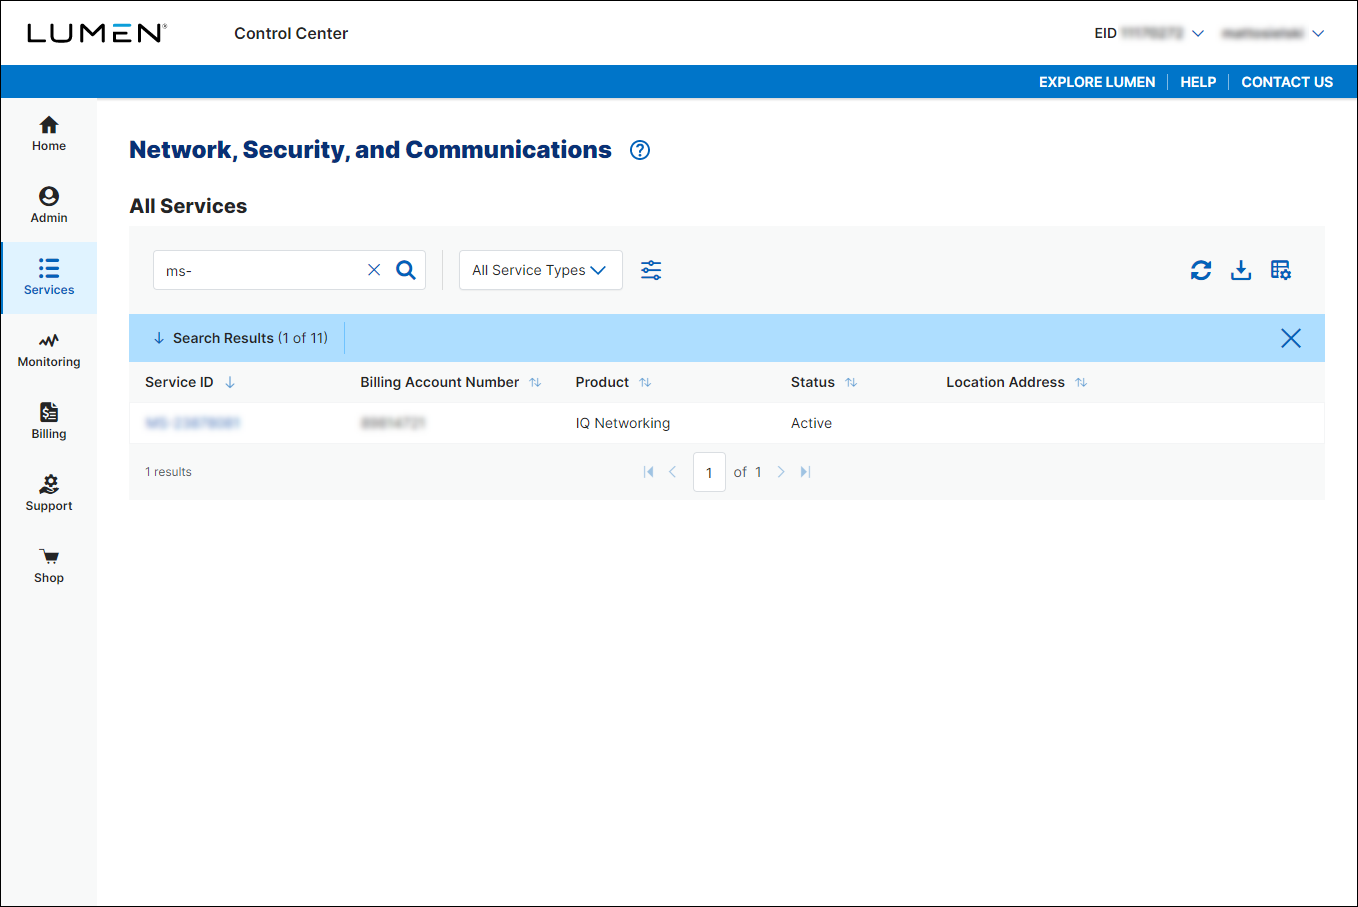 Network, Security, and Communications (showing search results for Managed Services))